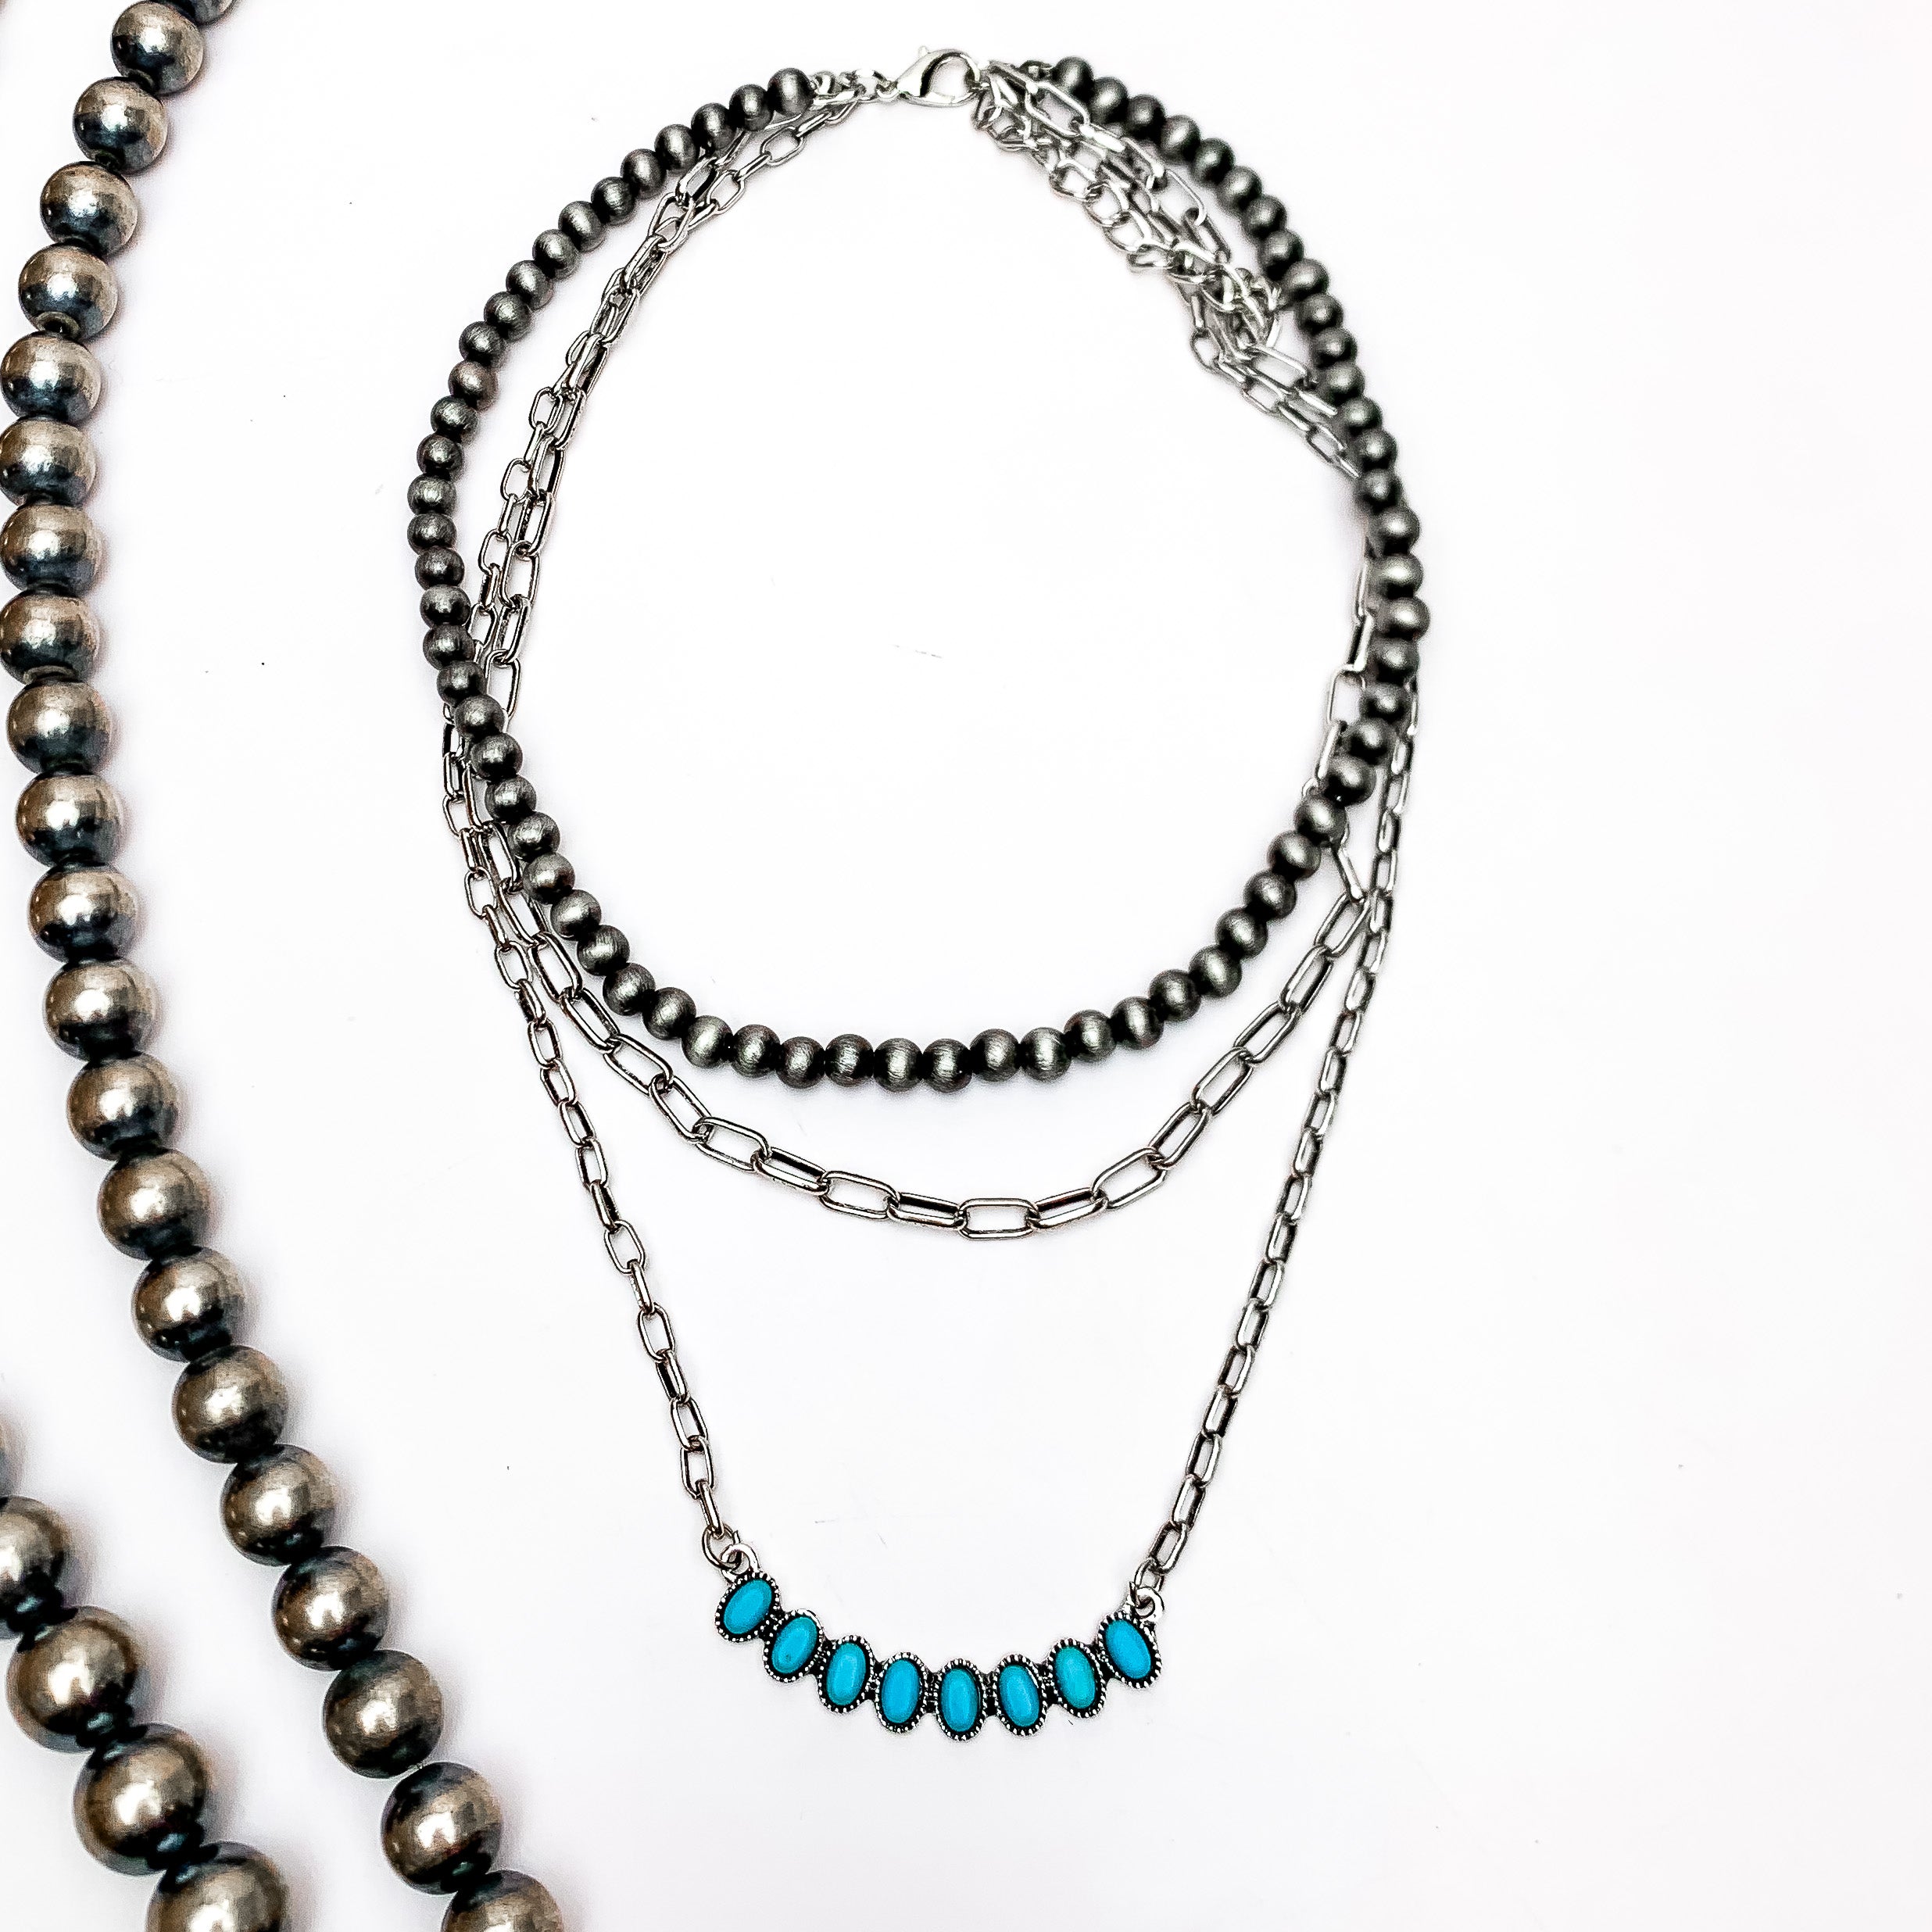 Triple Strand Silver Tone Necklace With Turquoise Stones Pendant. This necklace is on a white background with Navajo pearls on the left side for decoration.